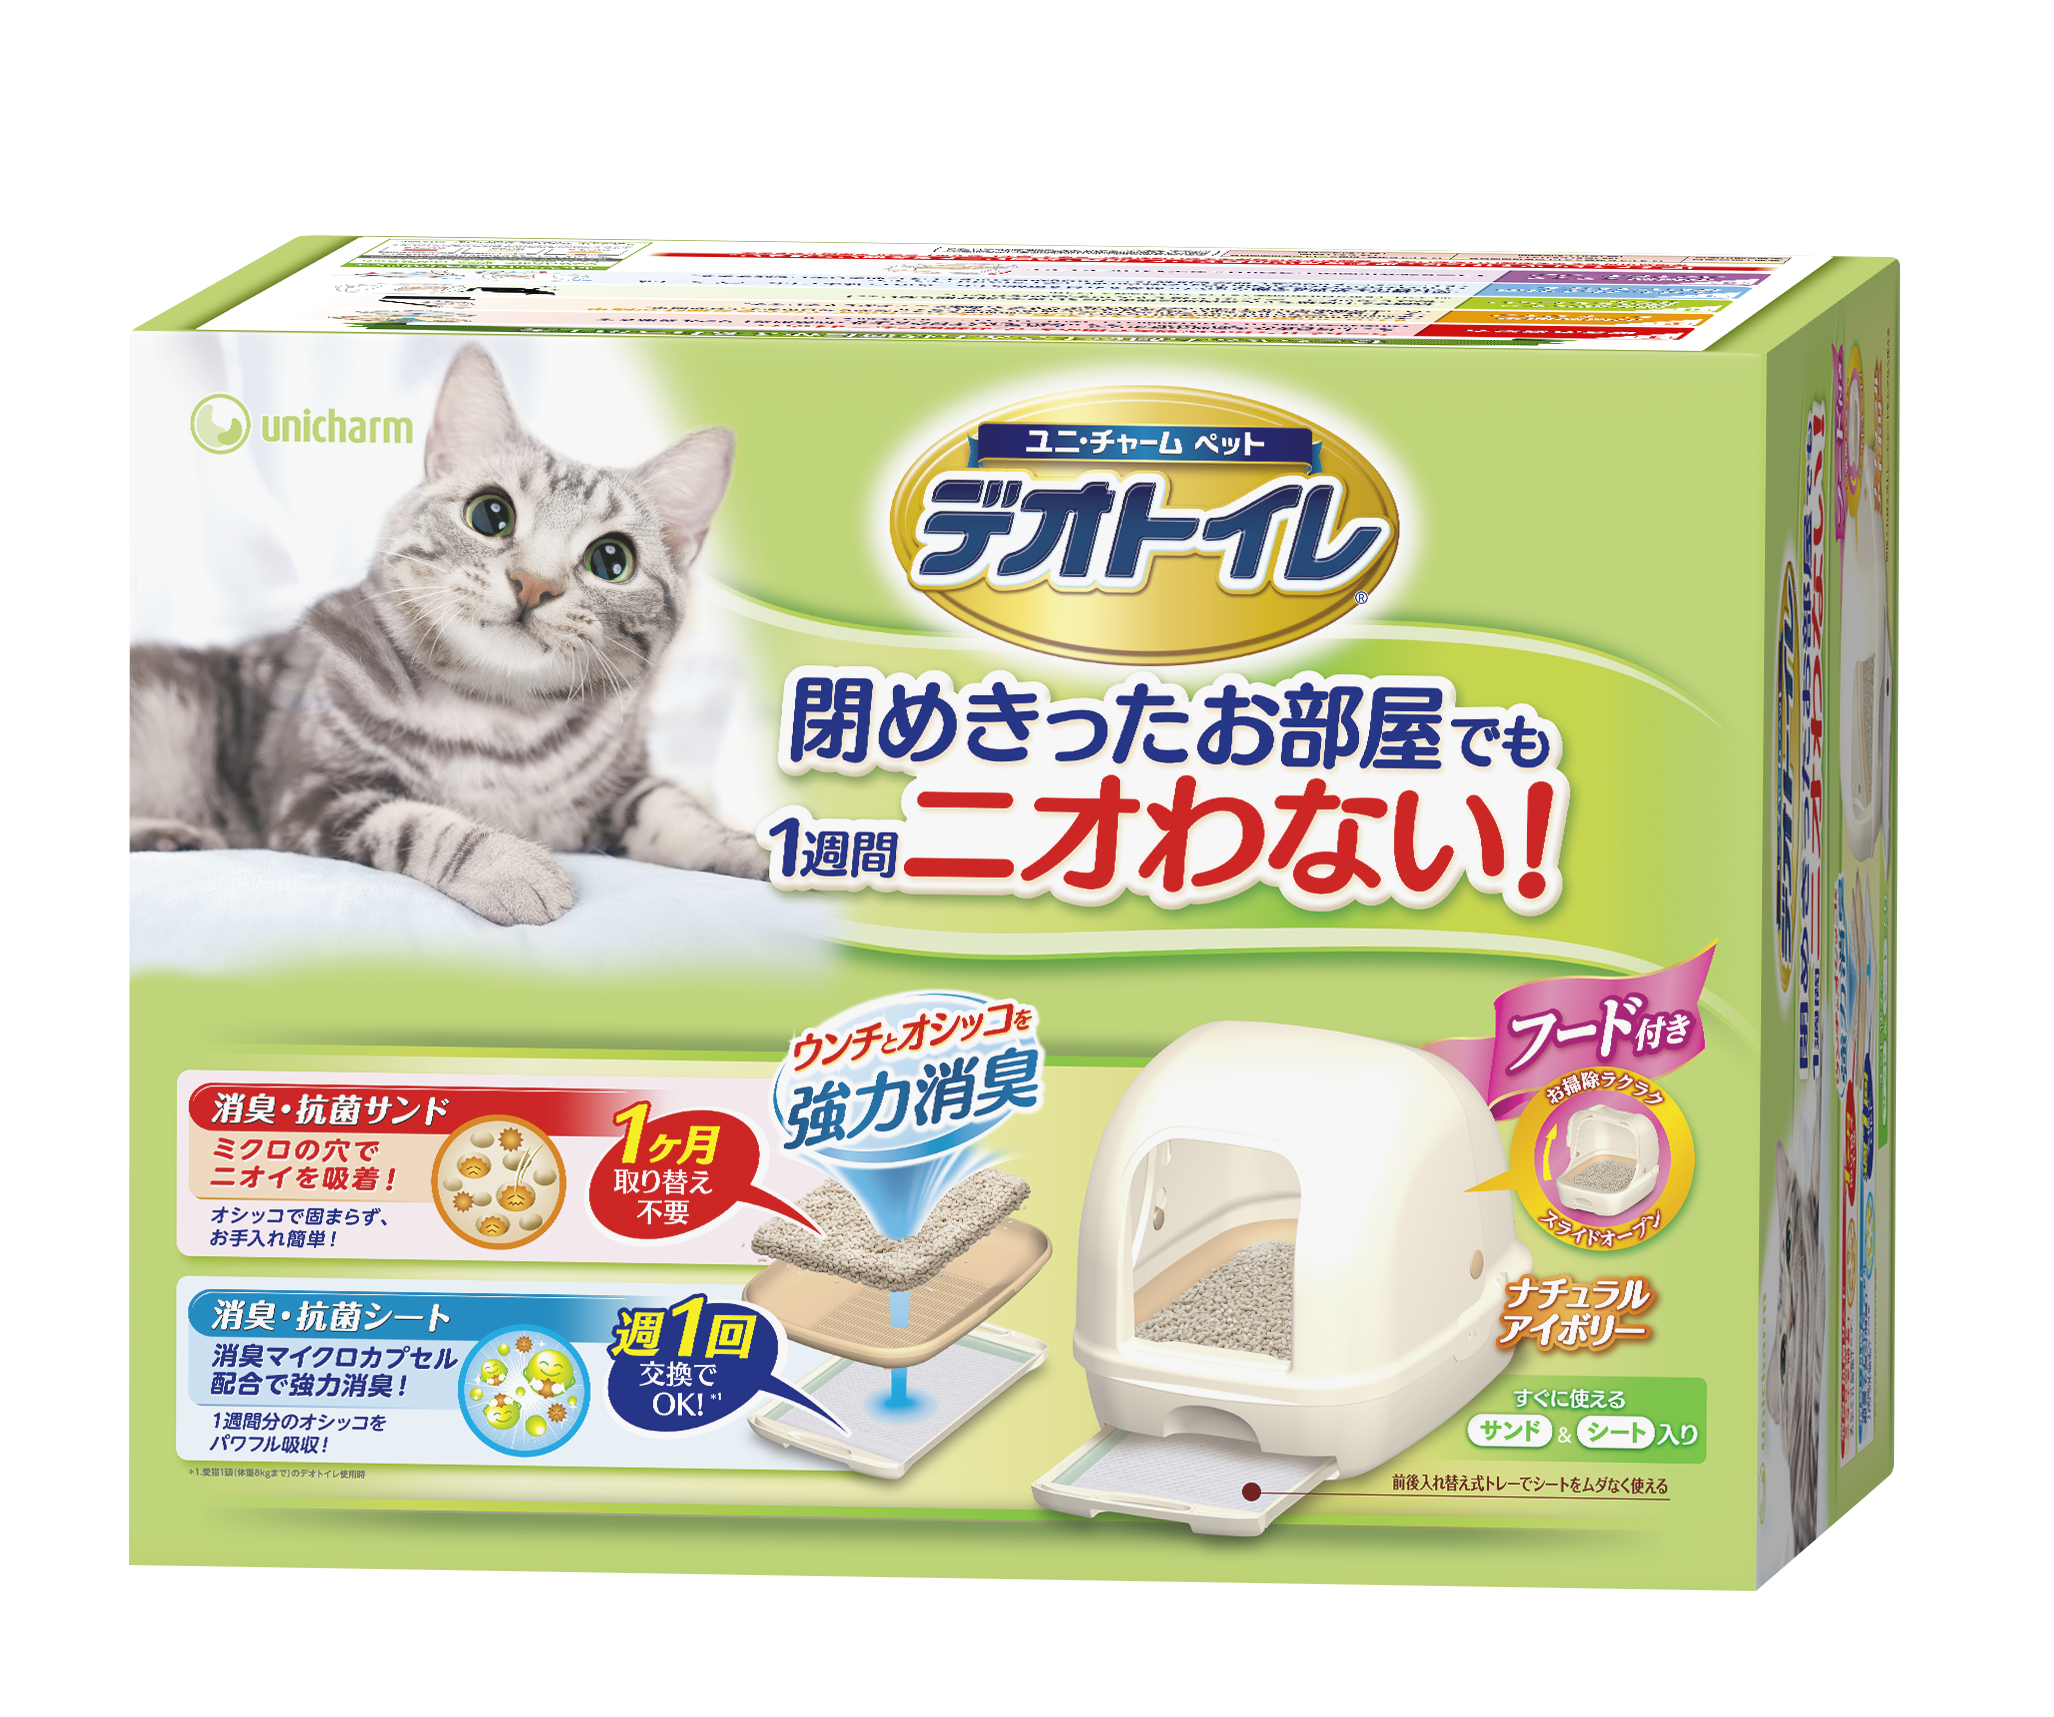 Unicharm Deo-Toilet Cat Litter System and Refills